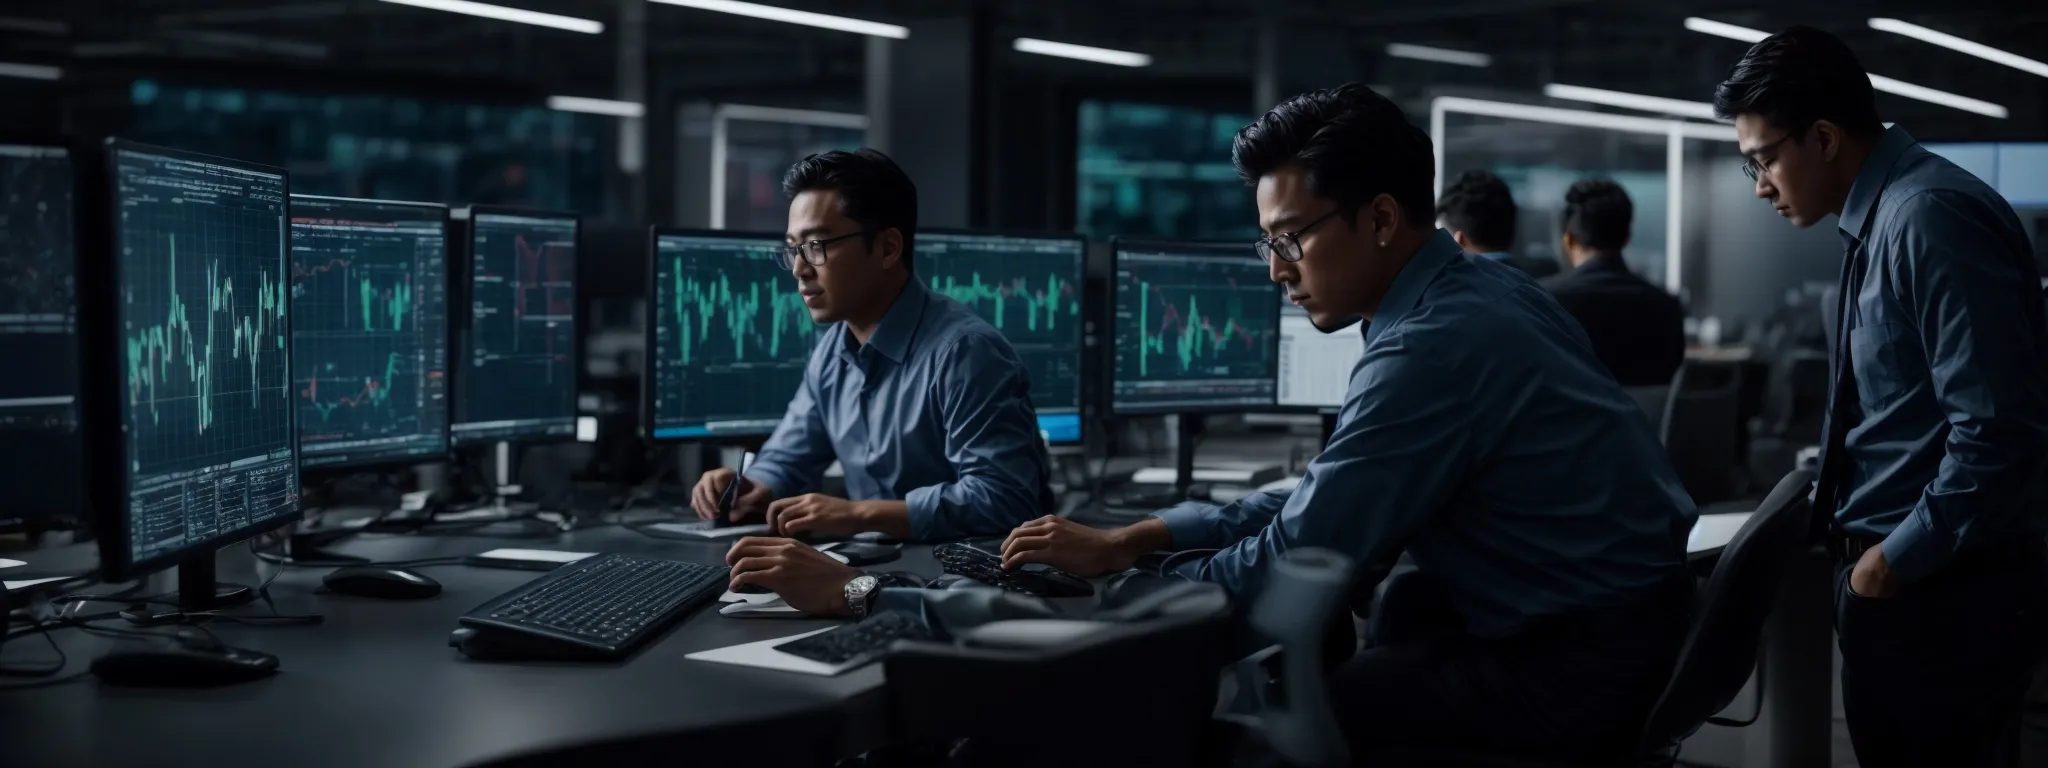 a group of it professionals intensely studies computer screens displaying complex graphs and data analytics.